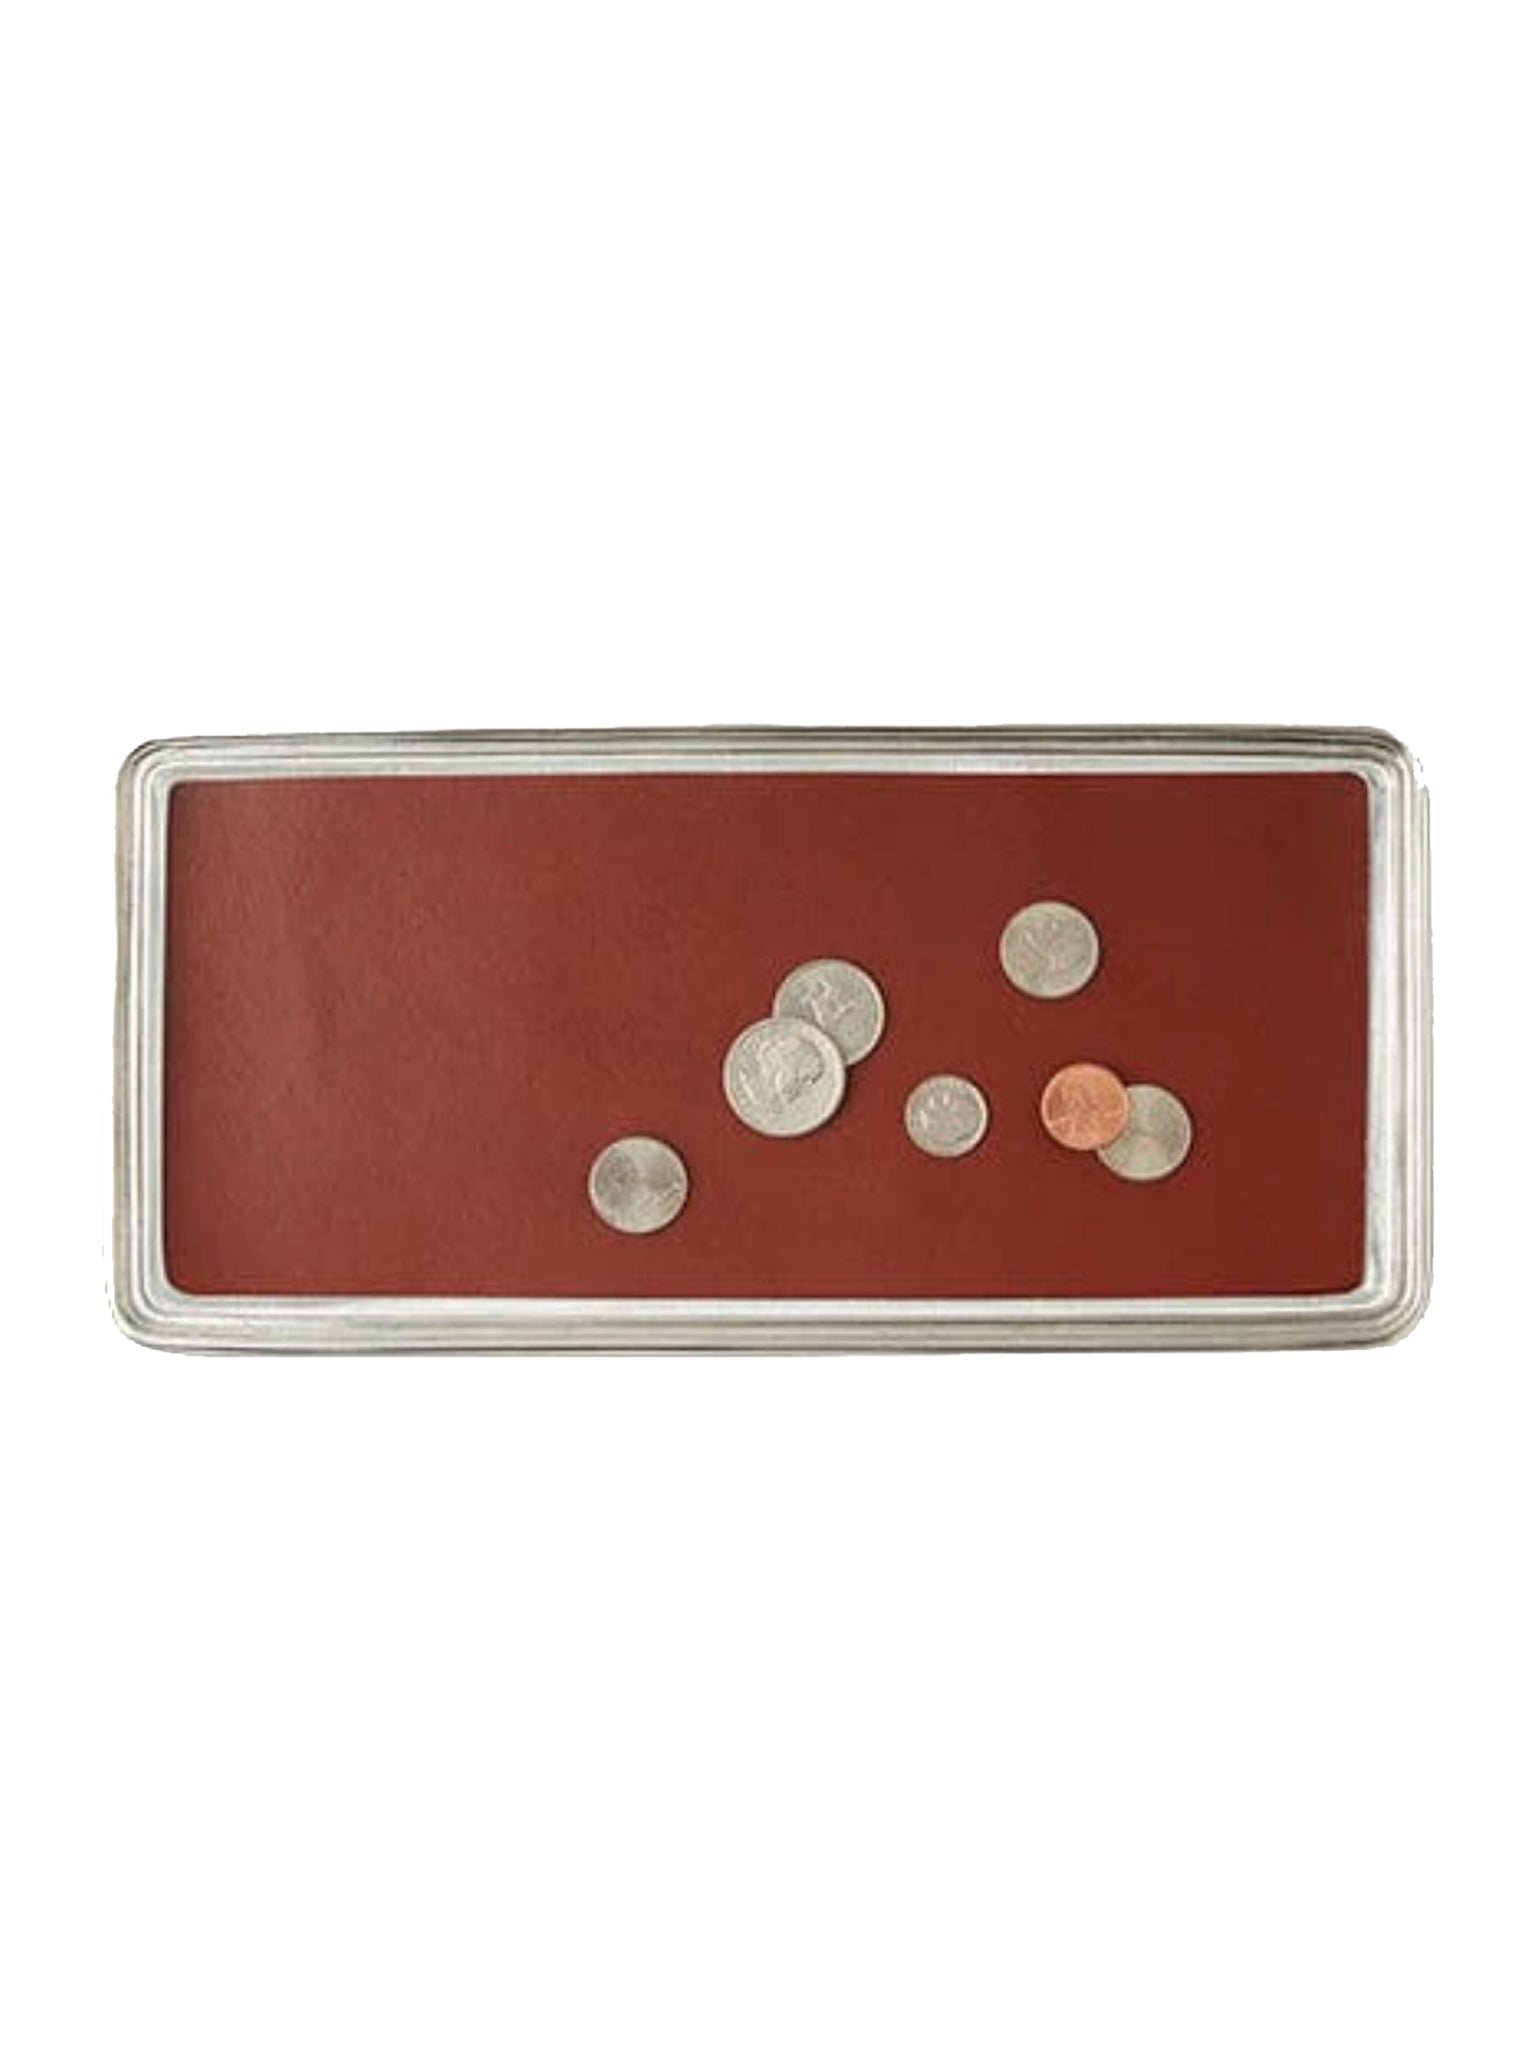 MATCH Pewter Vanity Tray with Leather Insert Weston Table